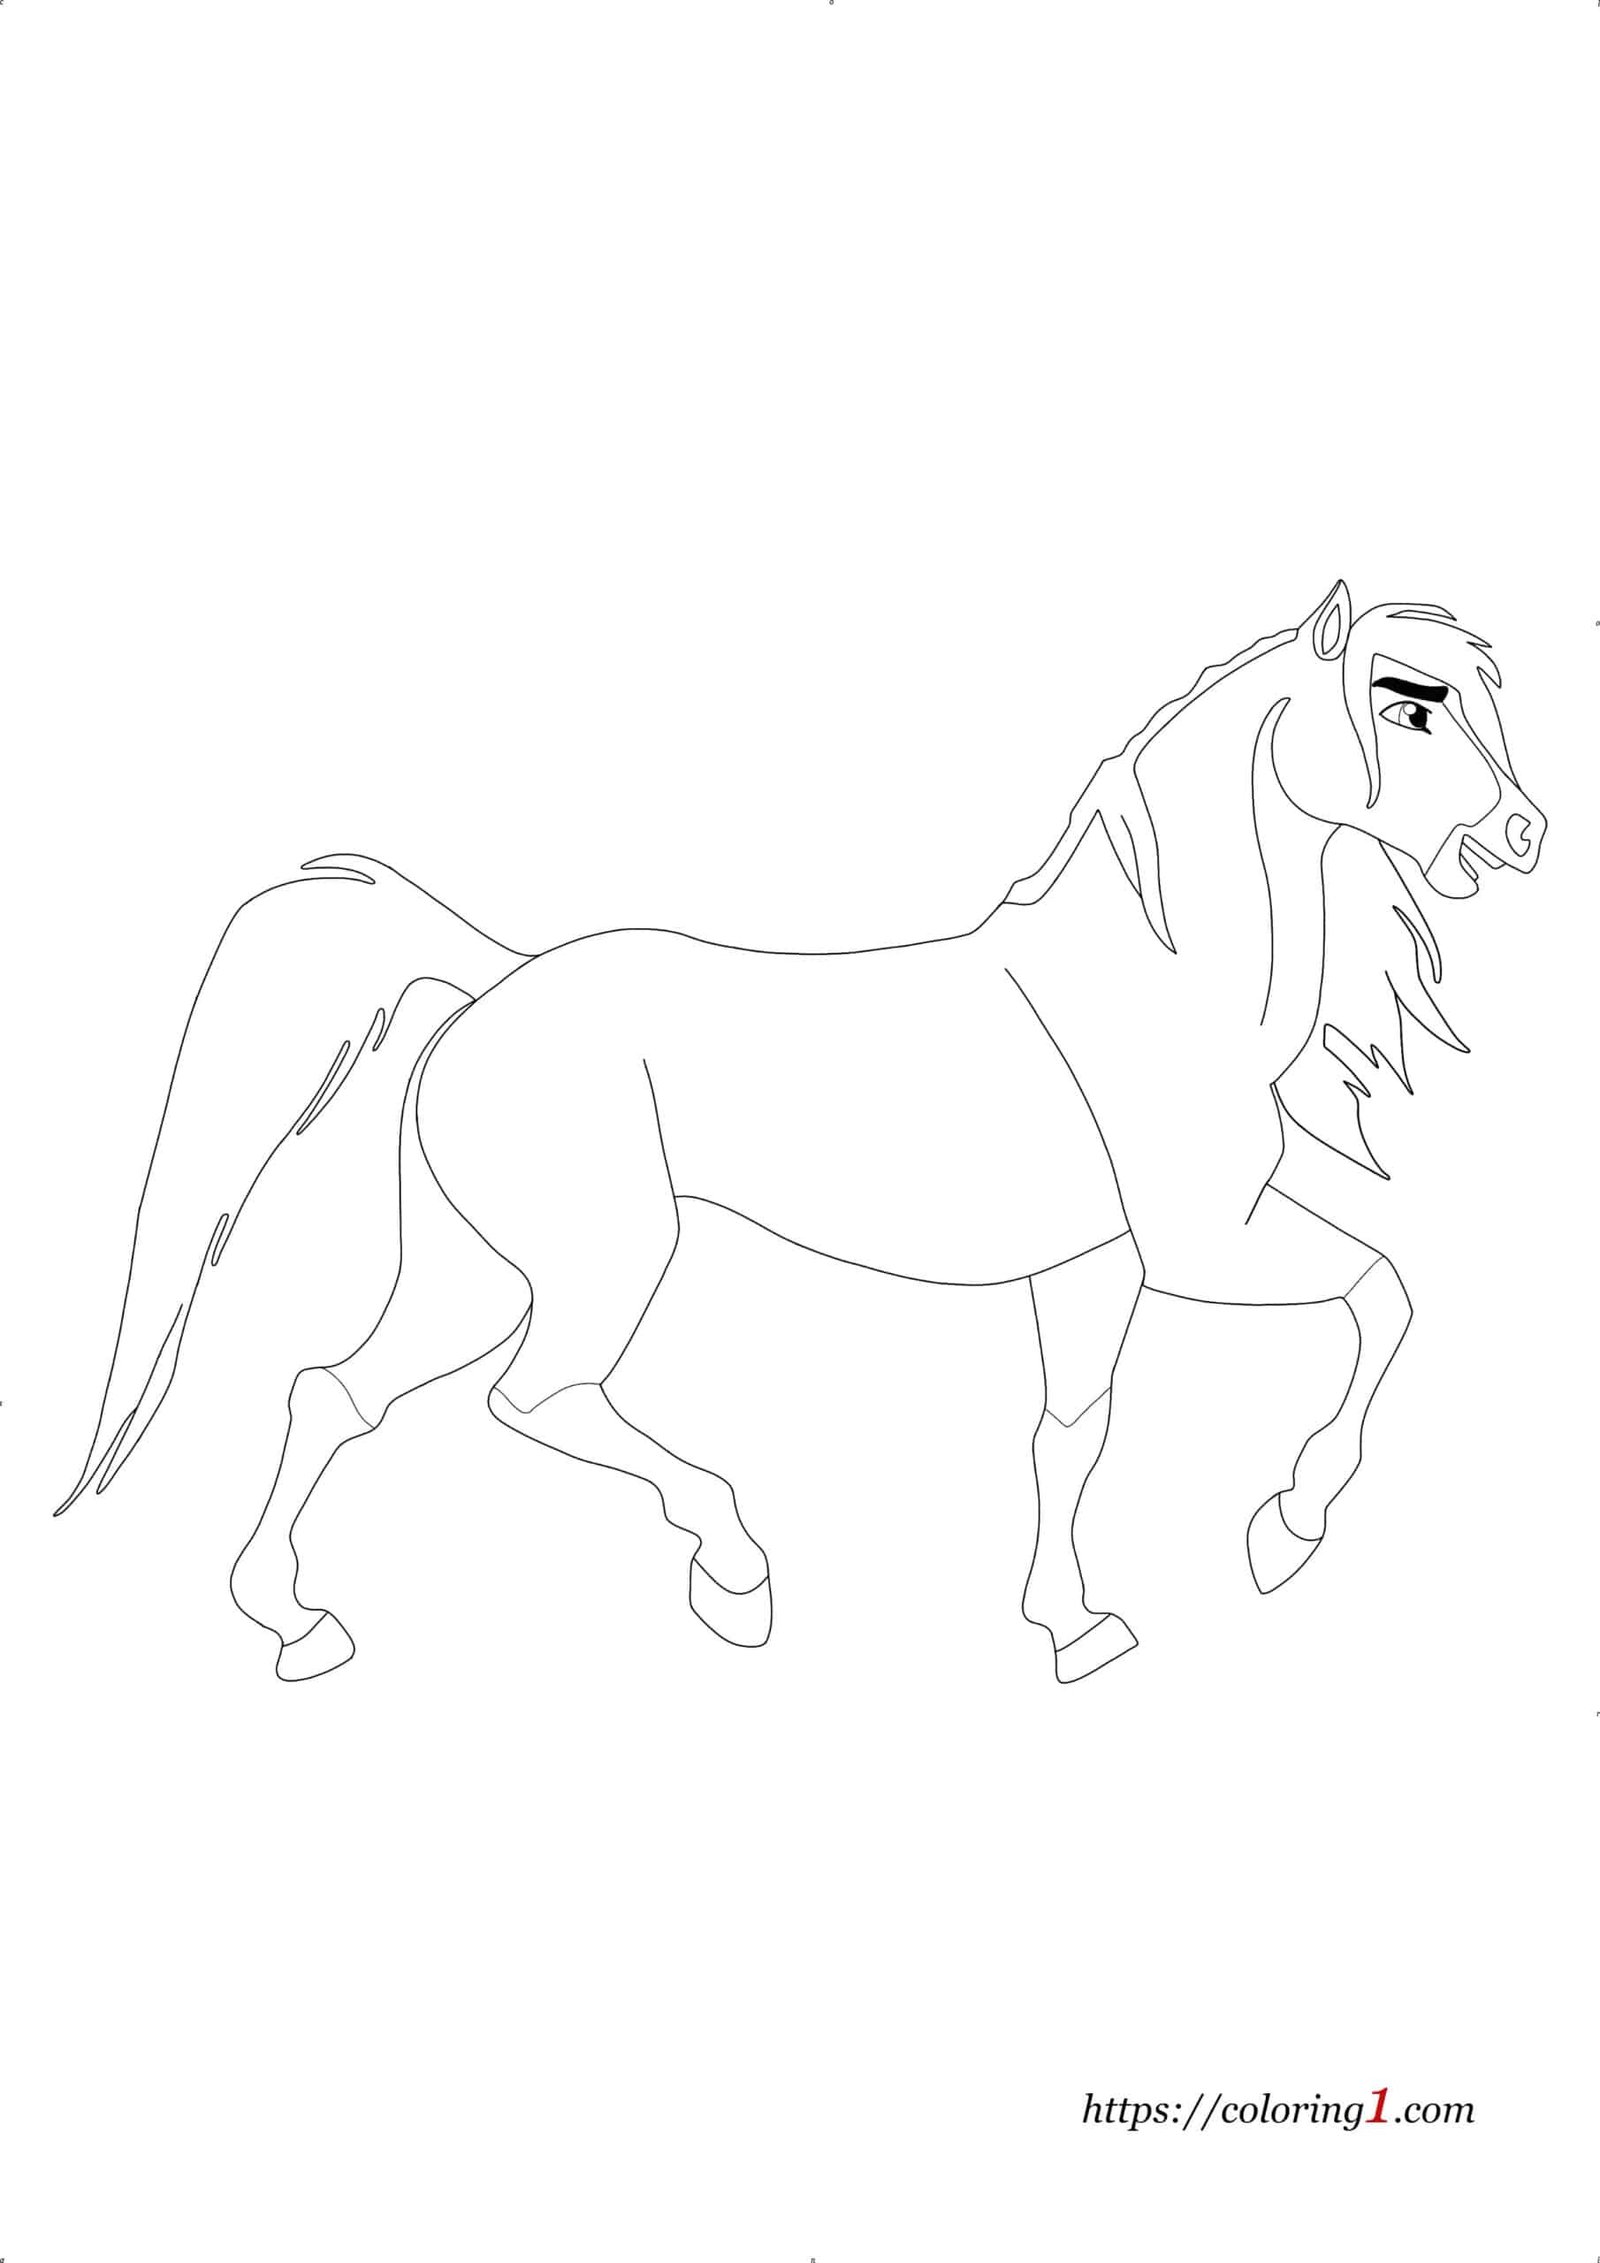 Spirit Horse coloring page